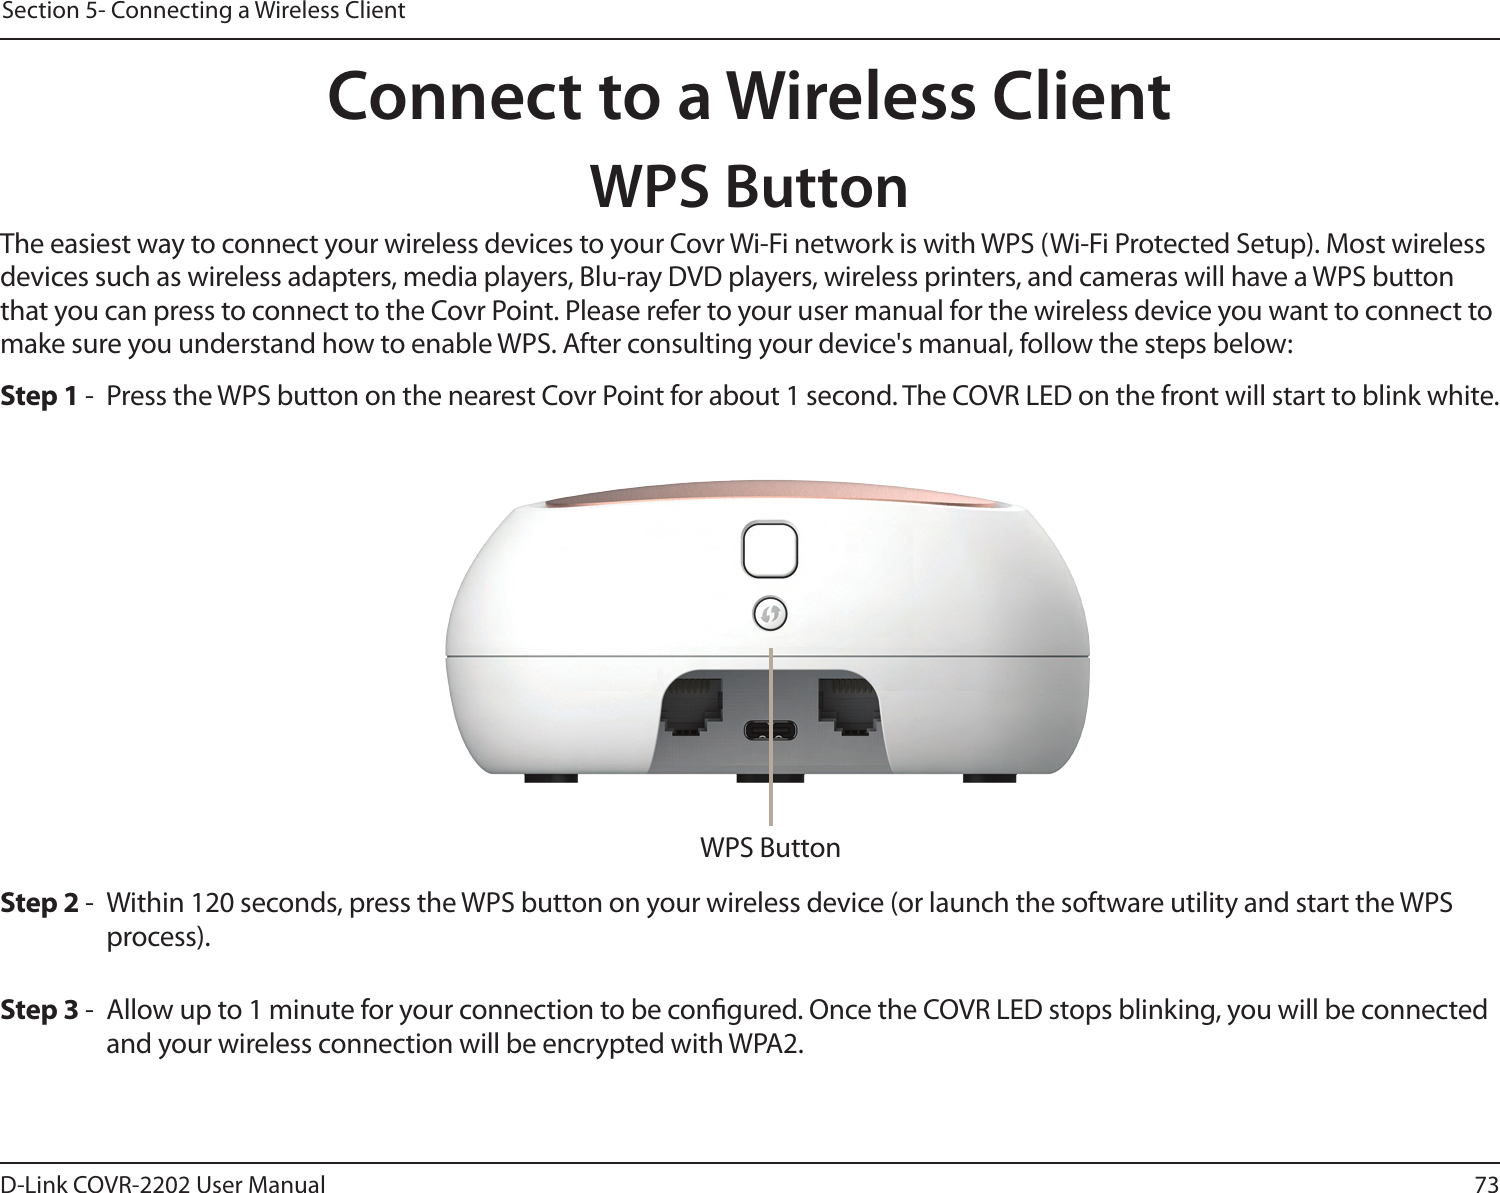 73D-Link COVR-2202 User ManualSection 5- Connecting a Wireless ClientConnect to a Wireless ClientWPS ButtonThe easiest way to connect your wireless devices to your Covr Wi-Fi network is with WPS (Wi-Fi Protected Setup). Most wireless devices such as wireless adapters, media players, Blu-ray DVD players, wireless printers, and cameras will have a WPS button that you can press to connect to the Covr Point. Please refer to your user manual for the wireless device you want to connect to make sure you understand how to enable WPS. After consulting your device&apos;s manual, follow the steps below:Step 2 -  Within 120 seconds, press the WPS button on your wireless device (or launch the software utility and start the WPS process).Step 1 -  Press the WPS button on the nearest Covr Point for about 1 second. The COVR LED on the front will start to blink white.Step 3 -  Allow up to 1 minute for your connection to be congured. Once the COVR LED stops blinking, you will be connected and your wireless connection will be encrypted with WPA2.WPS Button